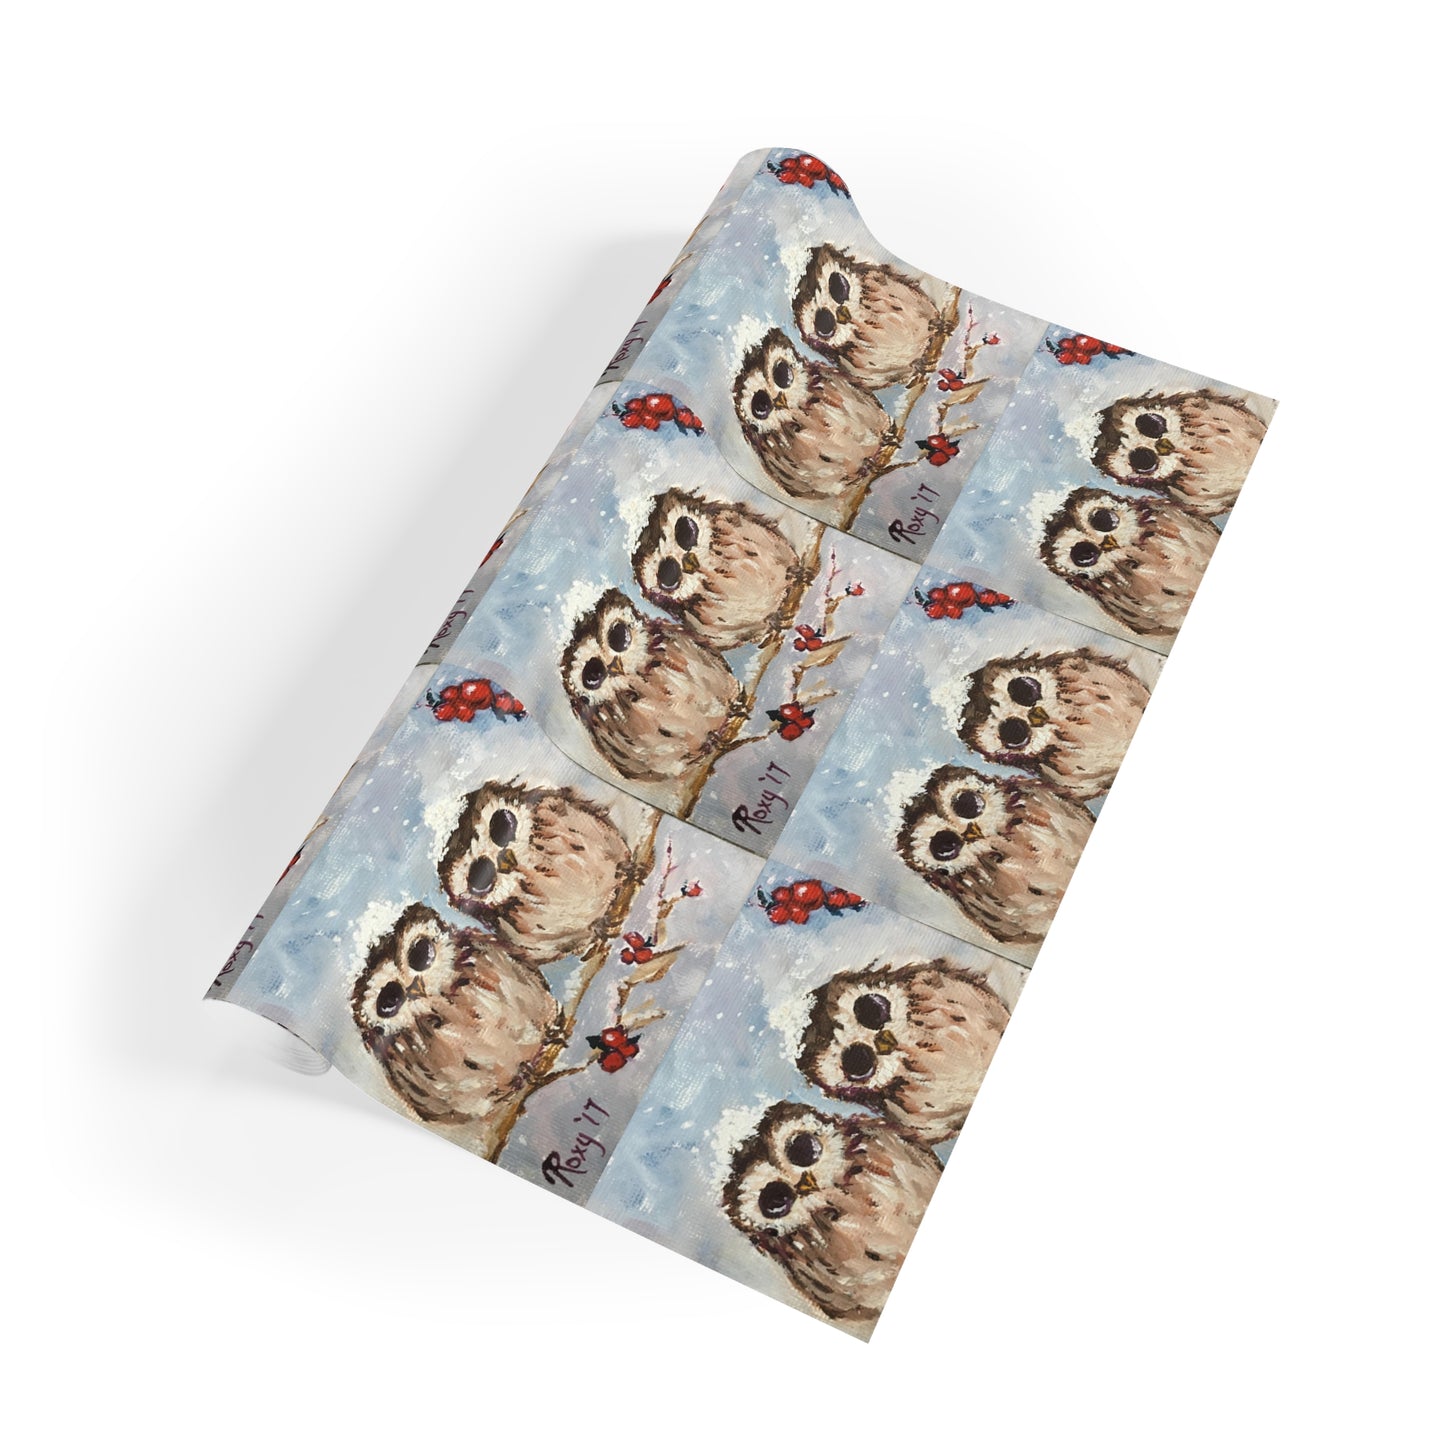 Adorable Baby Owls in a Snowy Berry Tree Gift Wrapping Paper  1pc